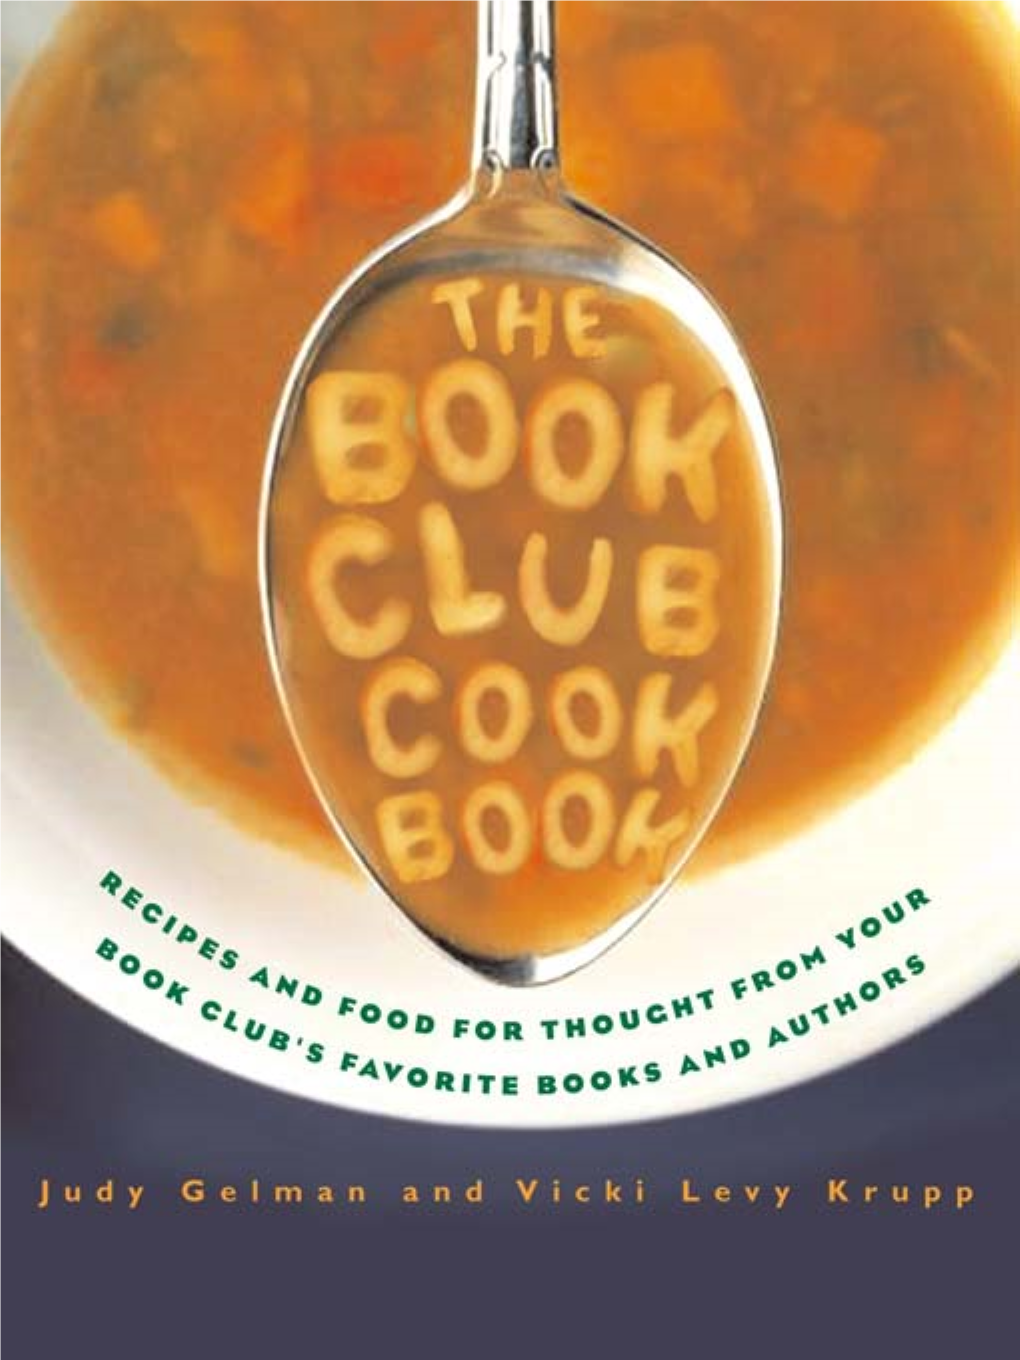 The Book Club Cookbook : Recipes and Food from Your Book